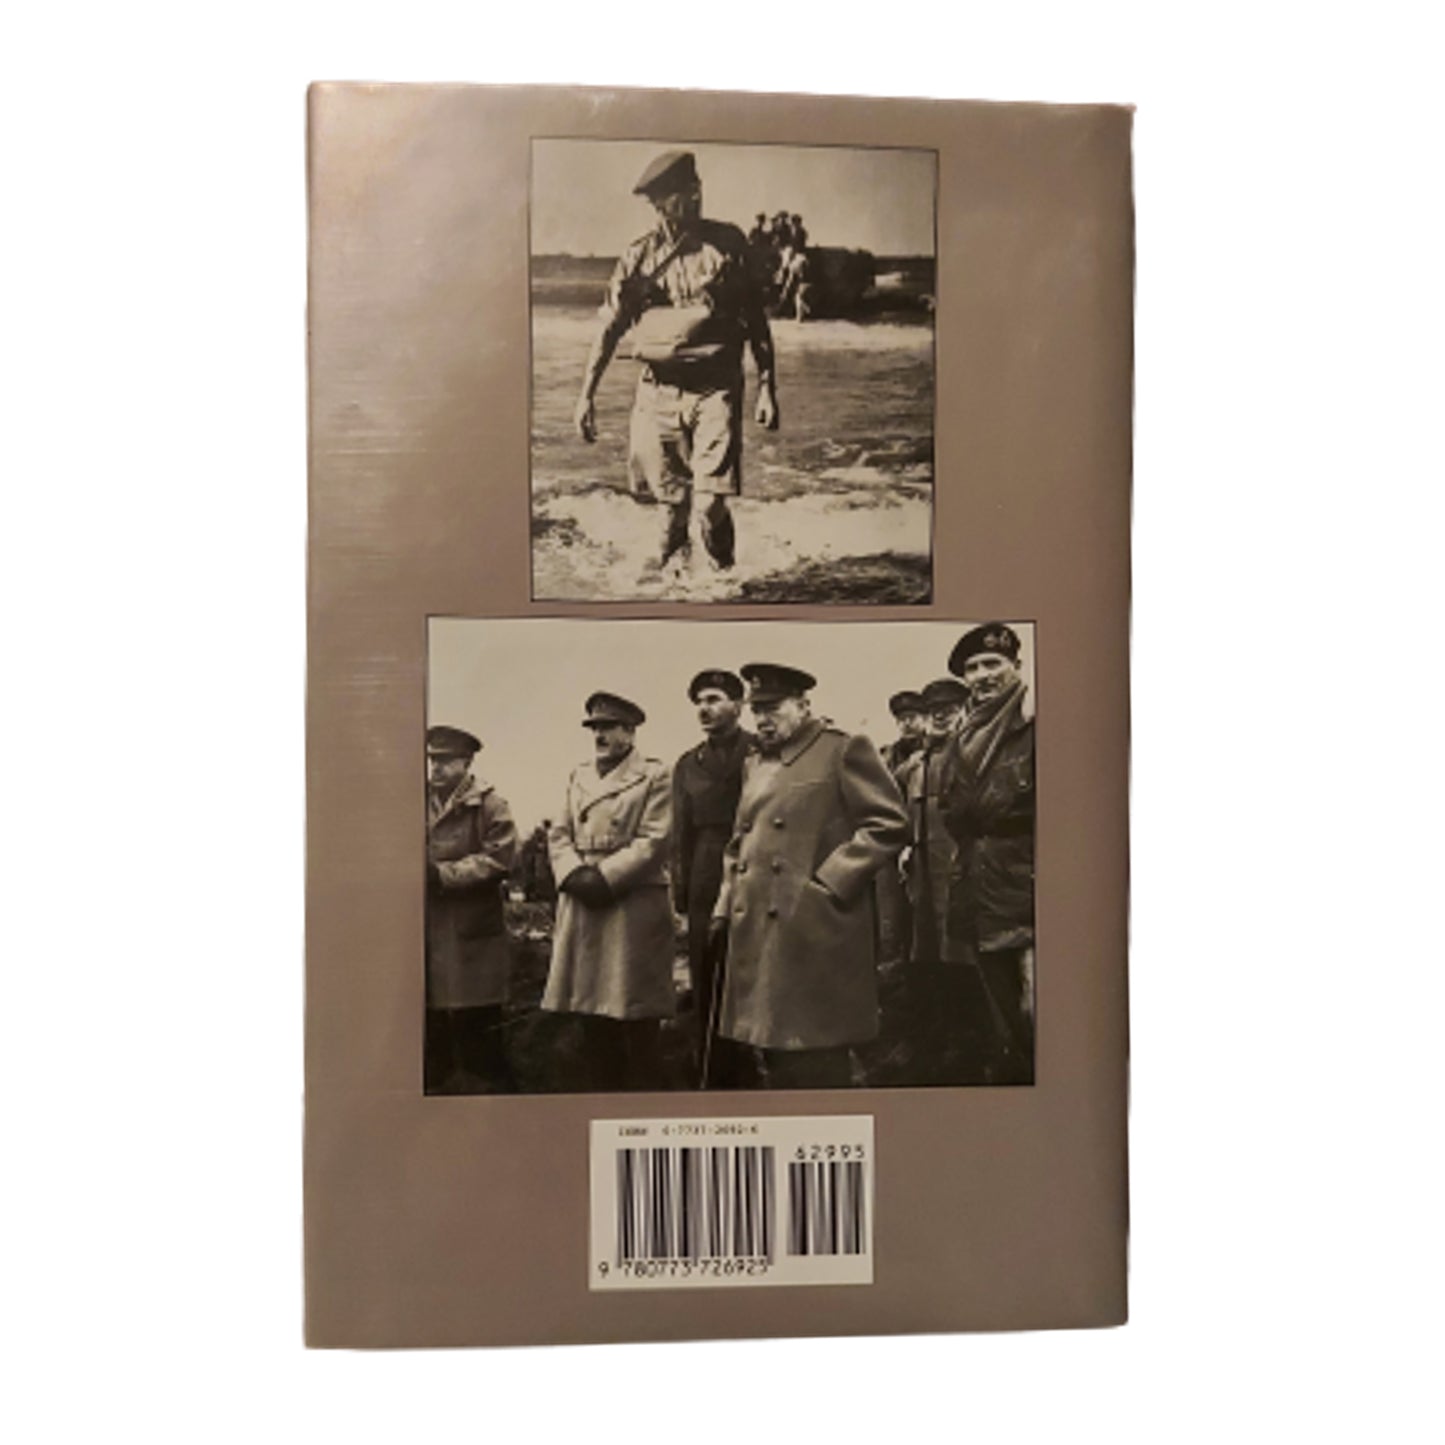 The Price Of Command - A Biography Of General Guy Simonds